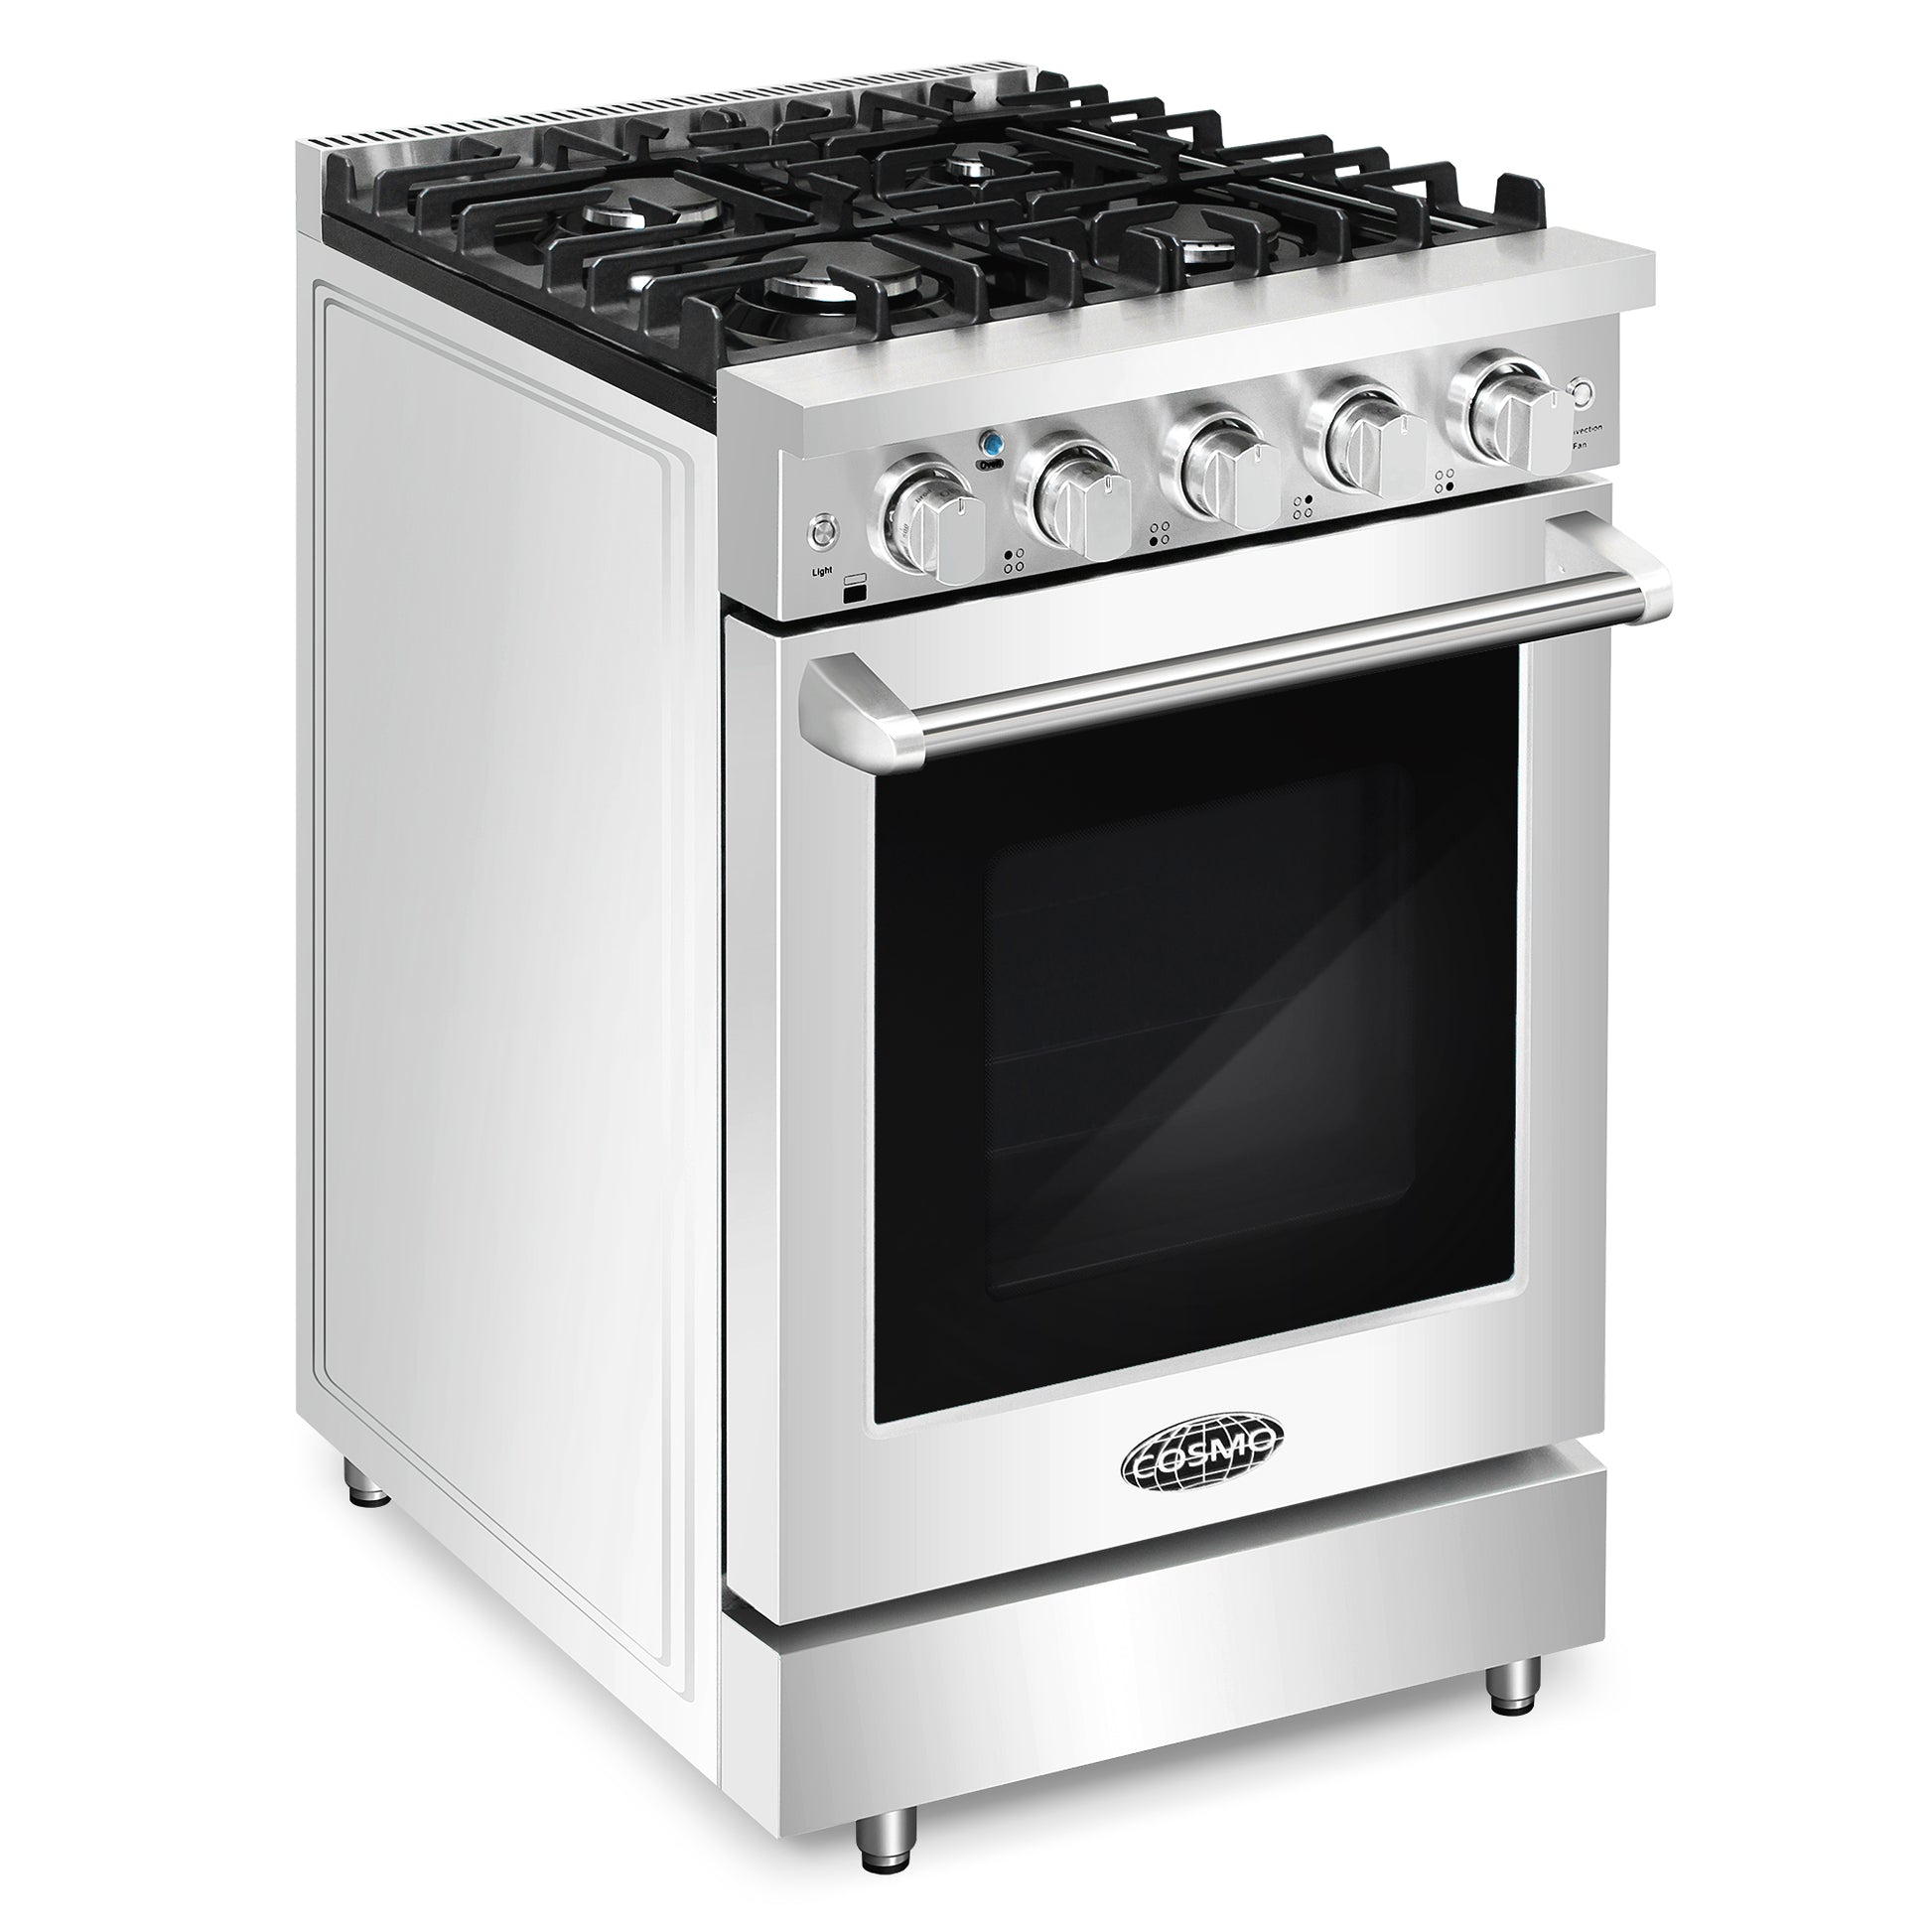 Cosmo 24 in. Stainless Steel Slide-In Freestanding Gas Range with 4 Sealed Burners, Cast Iron Grates, 3.73 cu. ft. Capacity Convection Oven